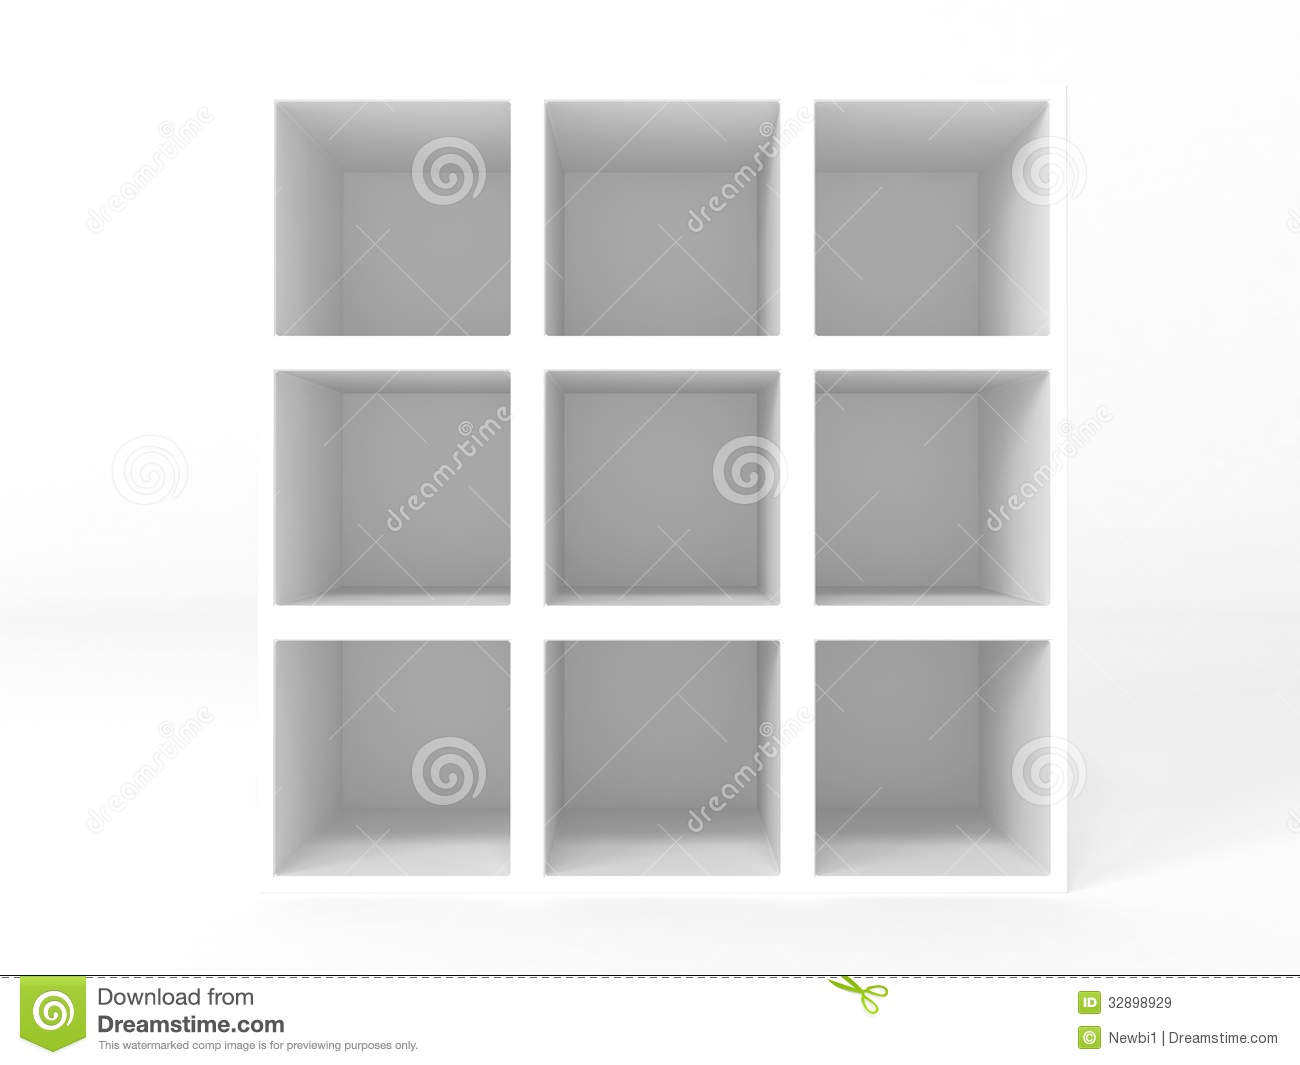 Royalty Free Stock Images  Closet With Empty Shelves